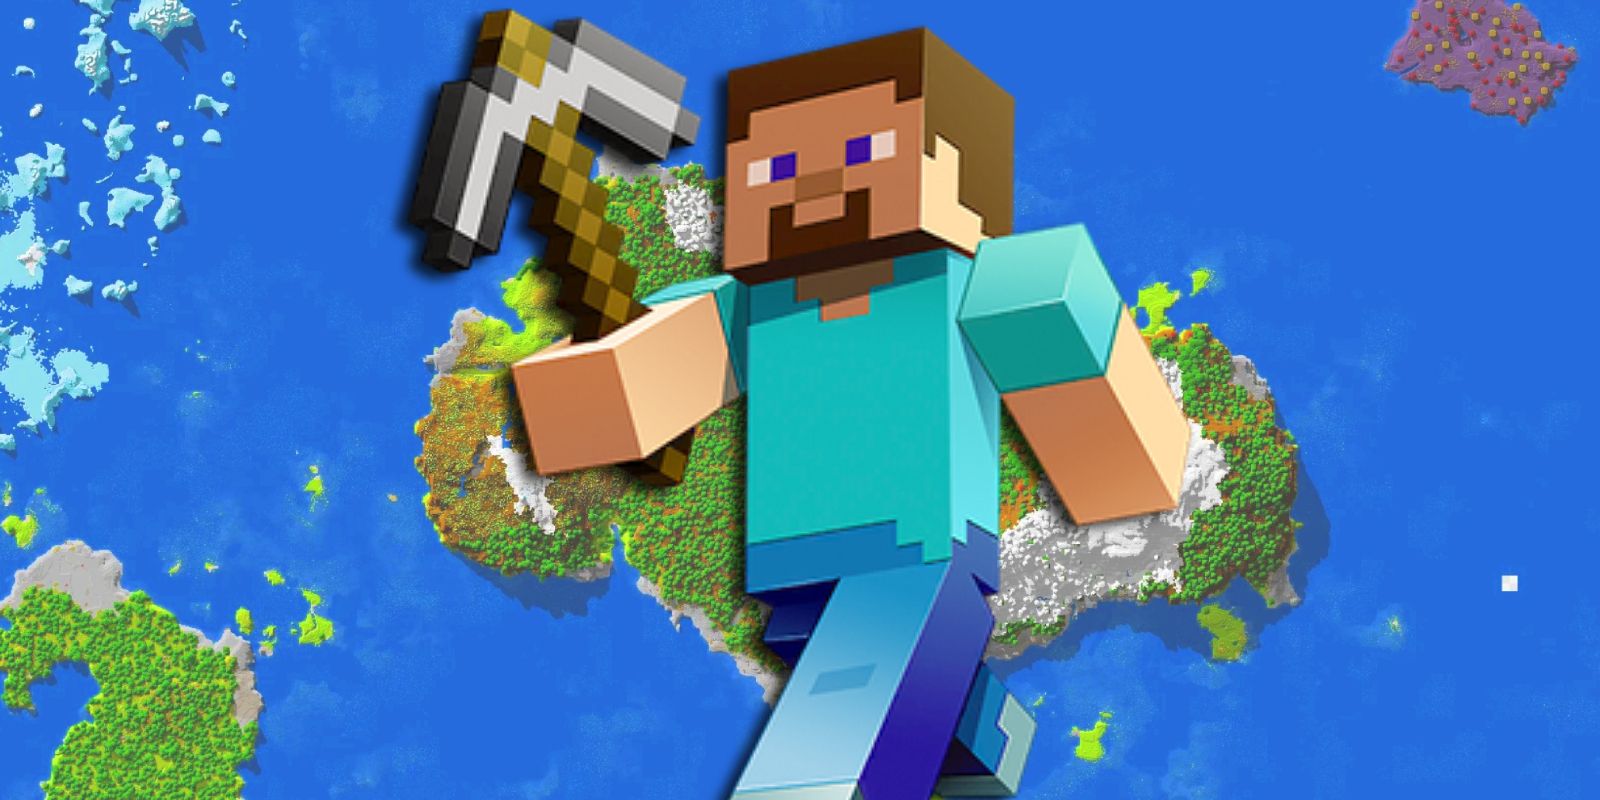 Minecraft's Steve player character in front of an island map.